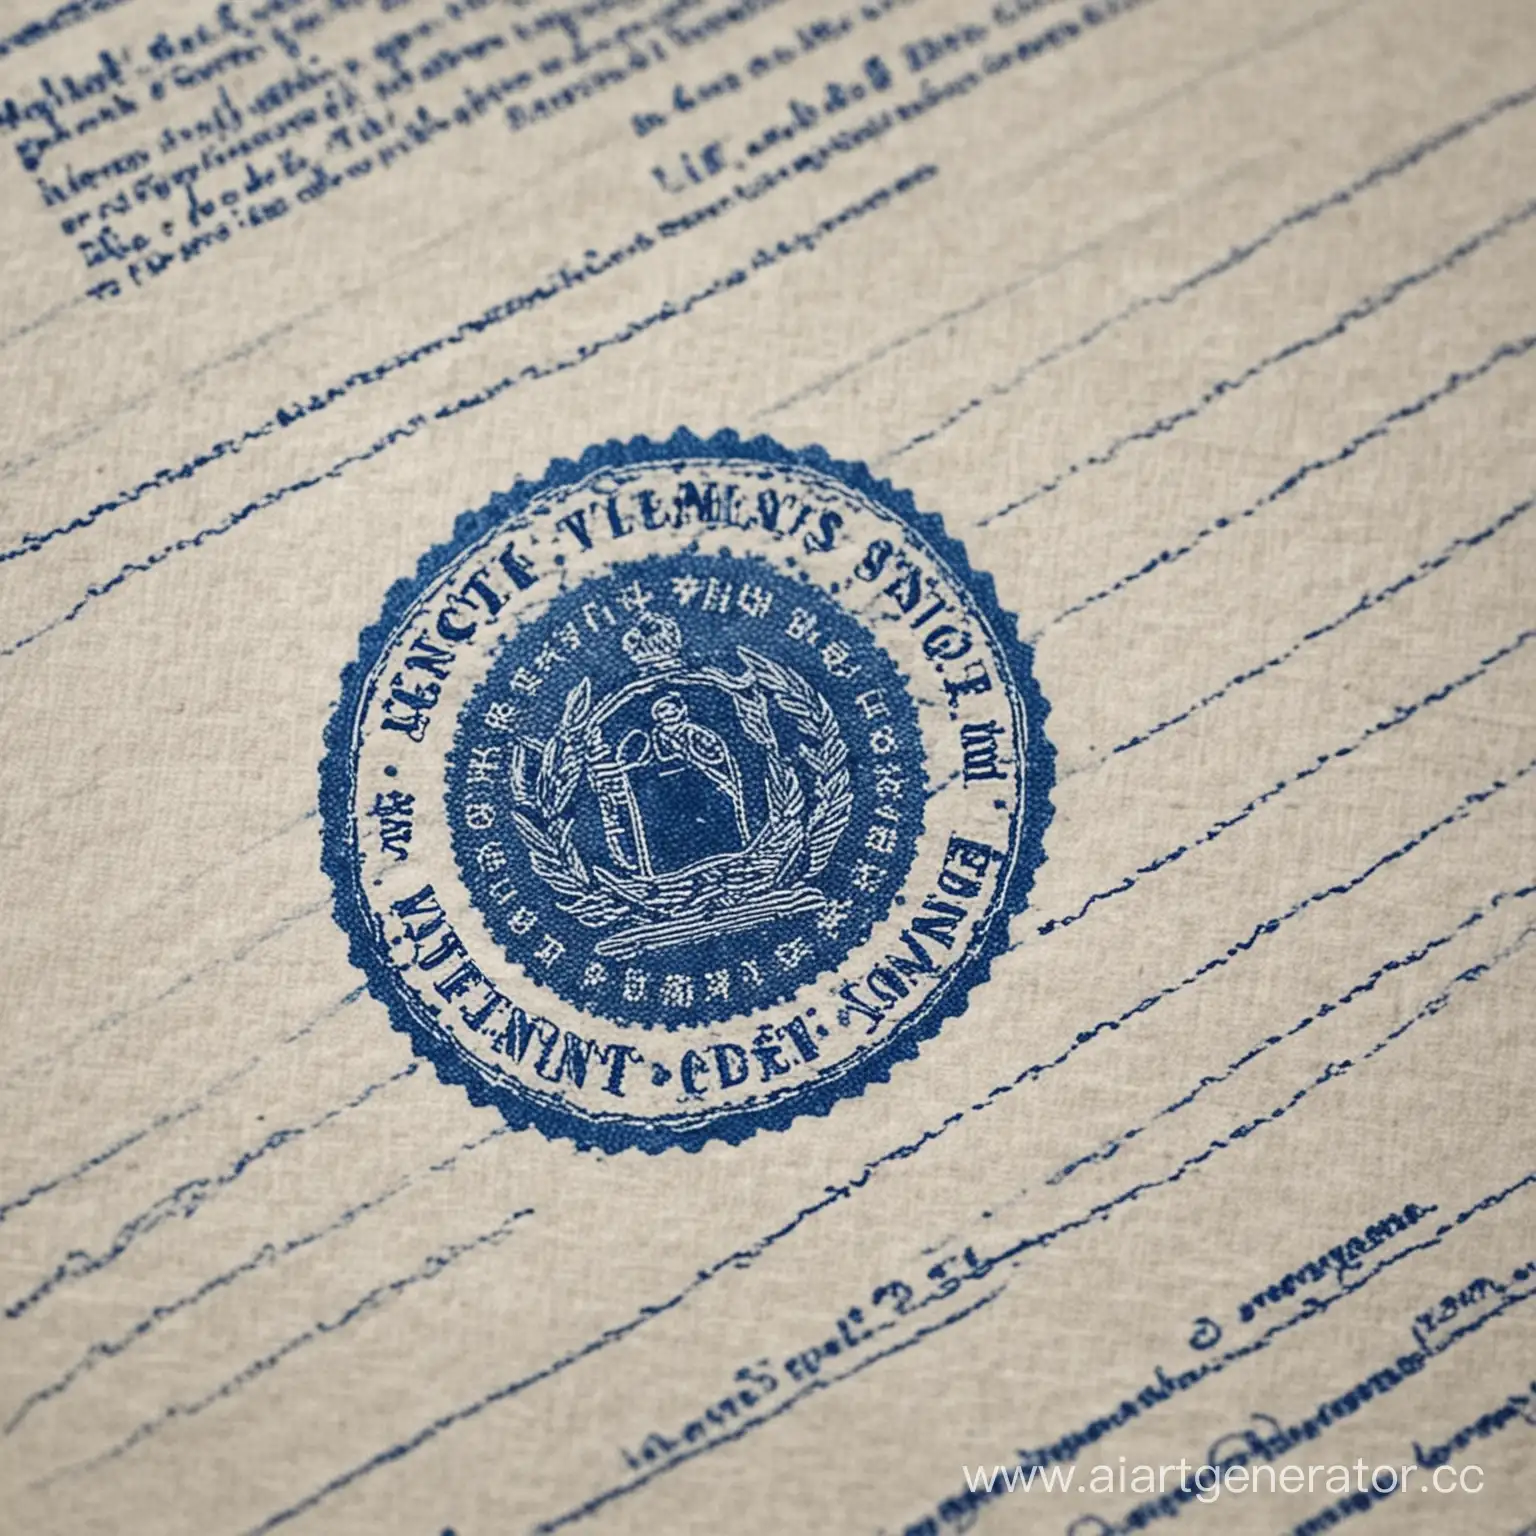 Blue-Stamp-on-Document-Official-Approval-Seal-in-Blue-Ink